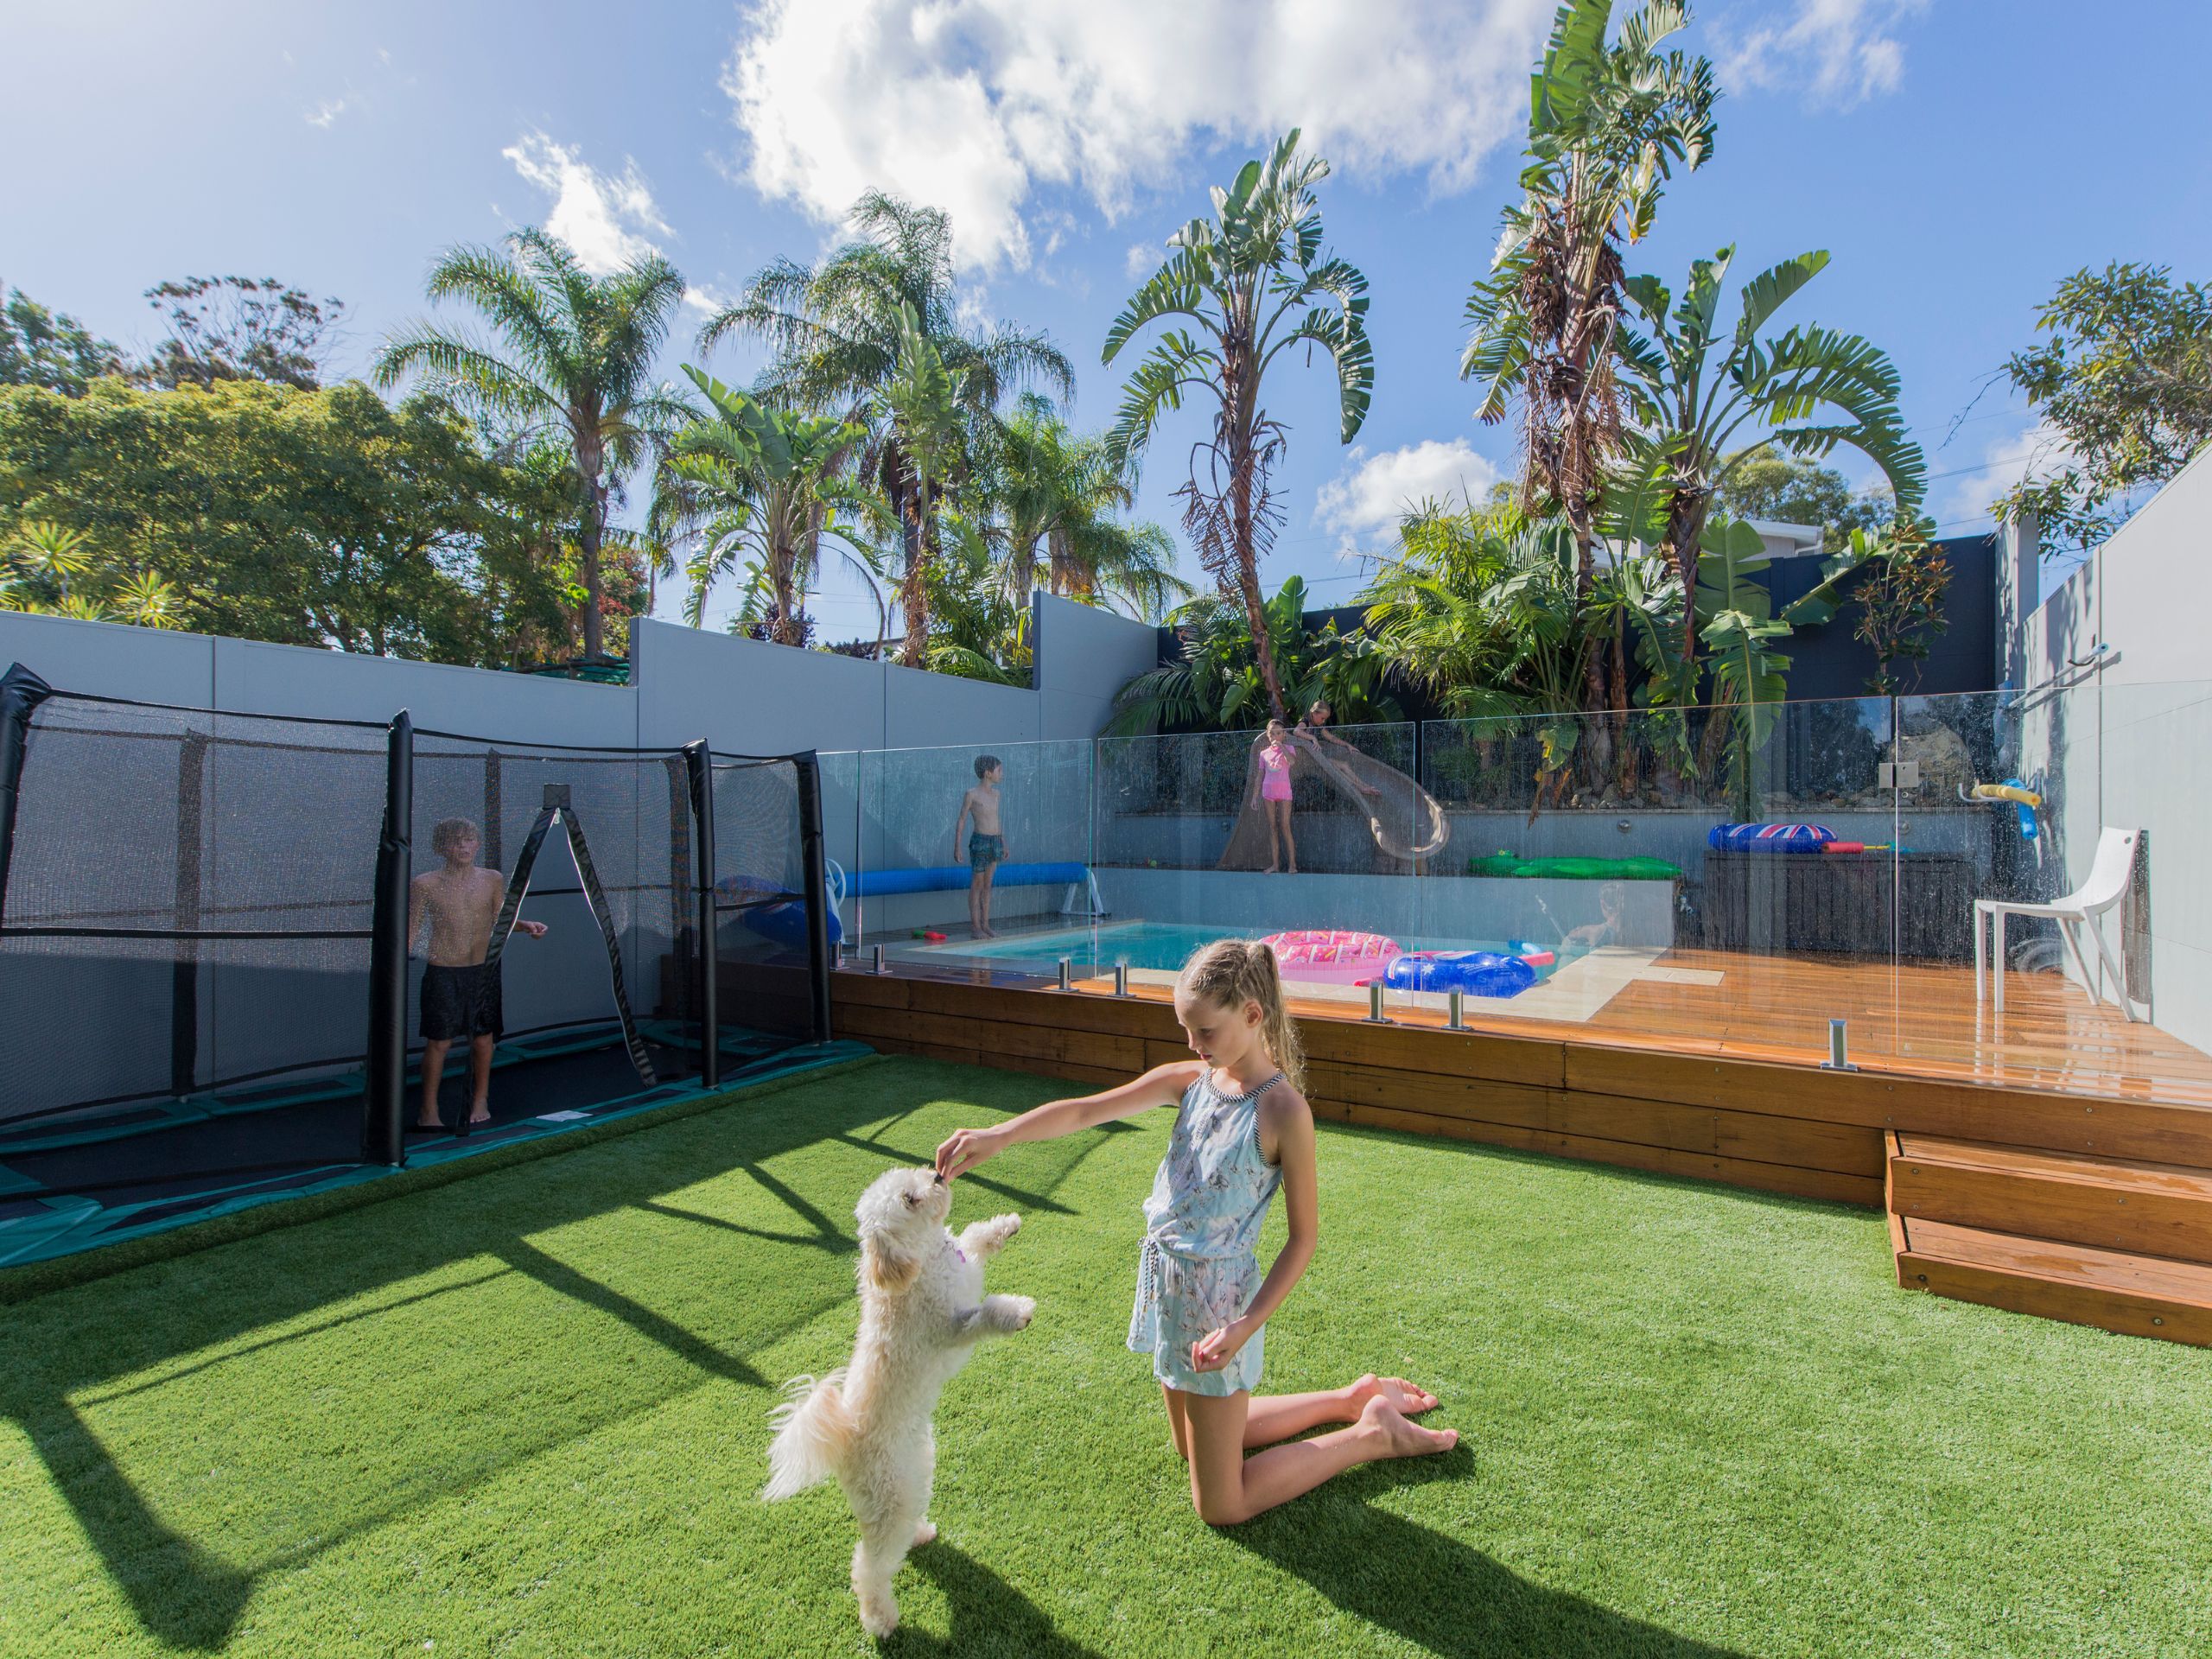 Creating a backyard haven for children is within your reach with ModularWalls